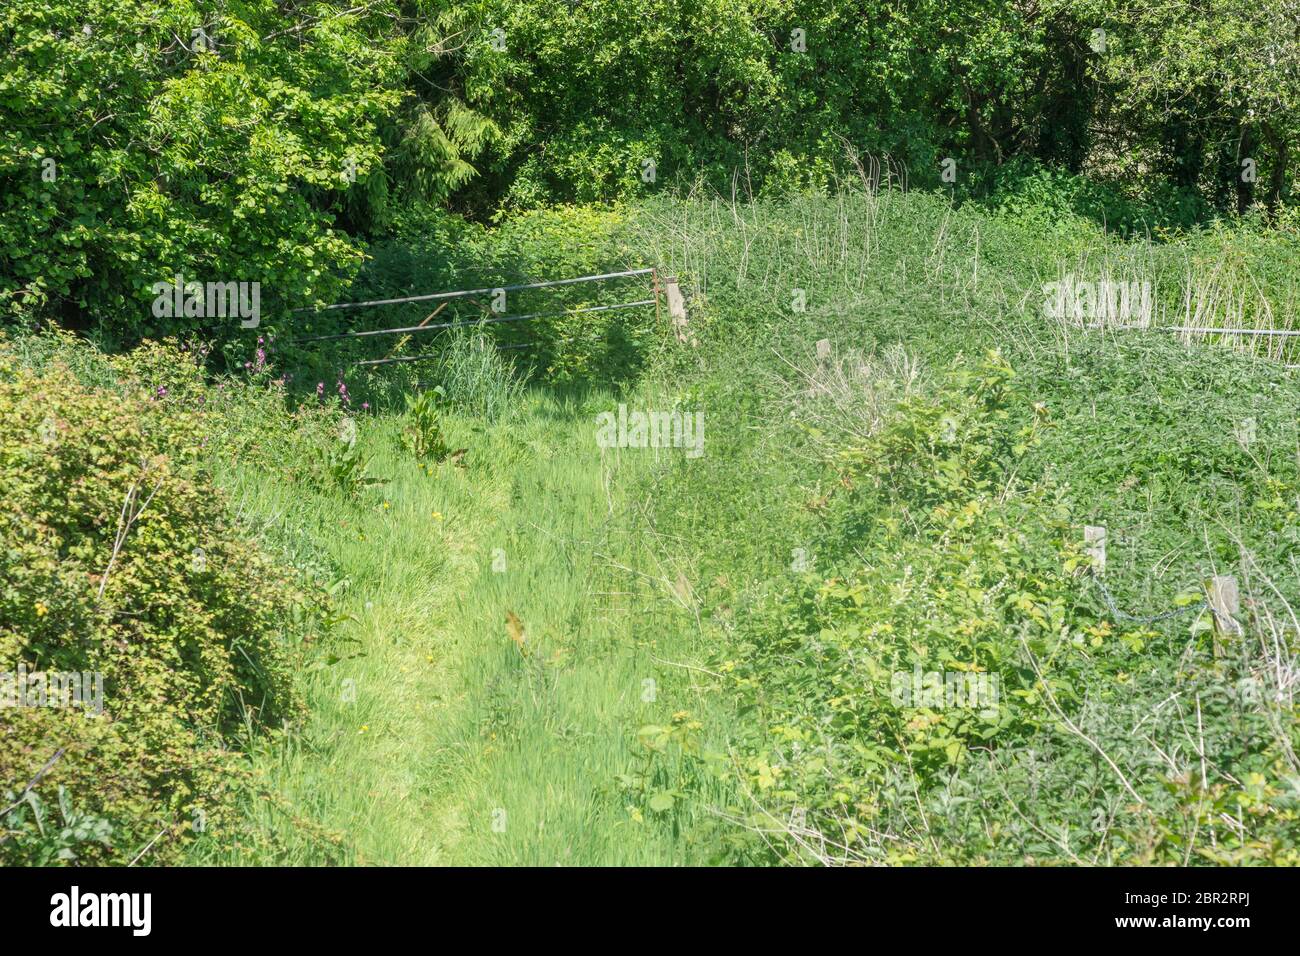 Short country track with metal farm gate surrounded by overgrowing weeds and brambles. Metaphor swamped, engulfed, surrounded, overgrown. Stock Photo